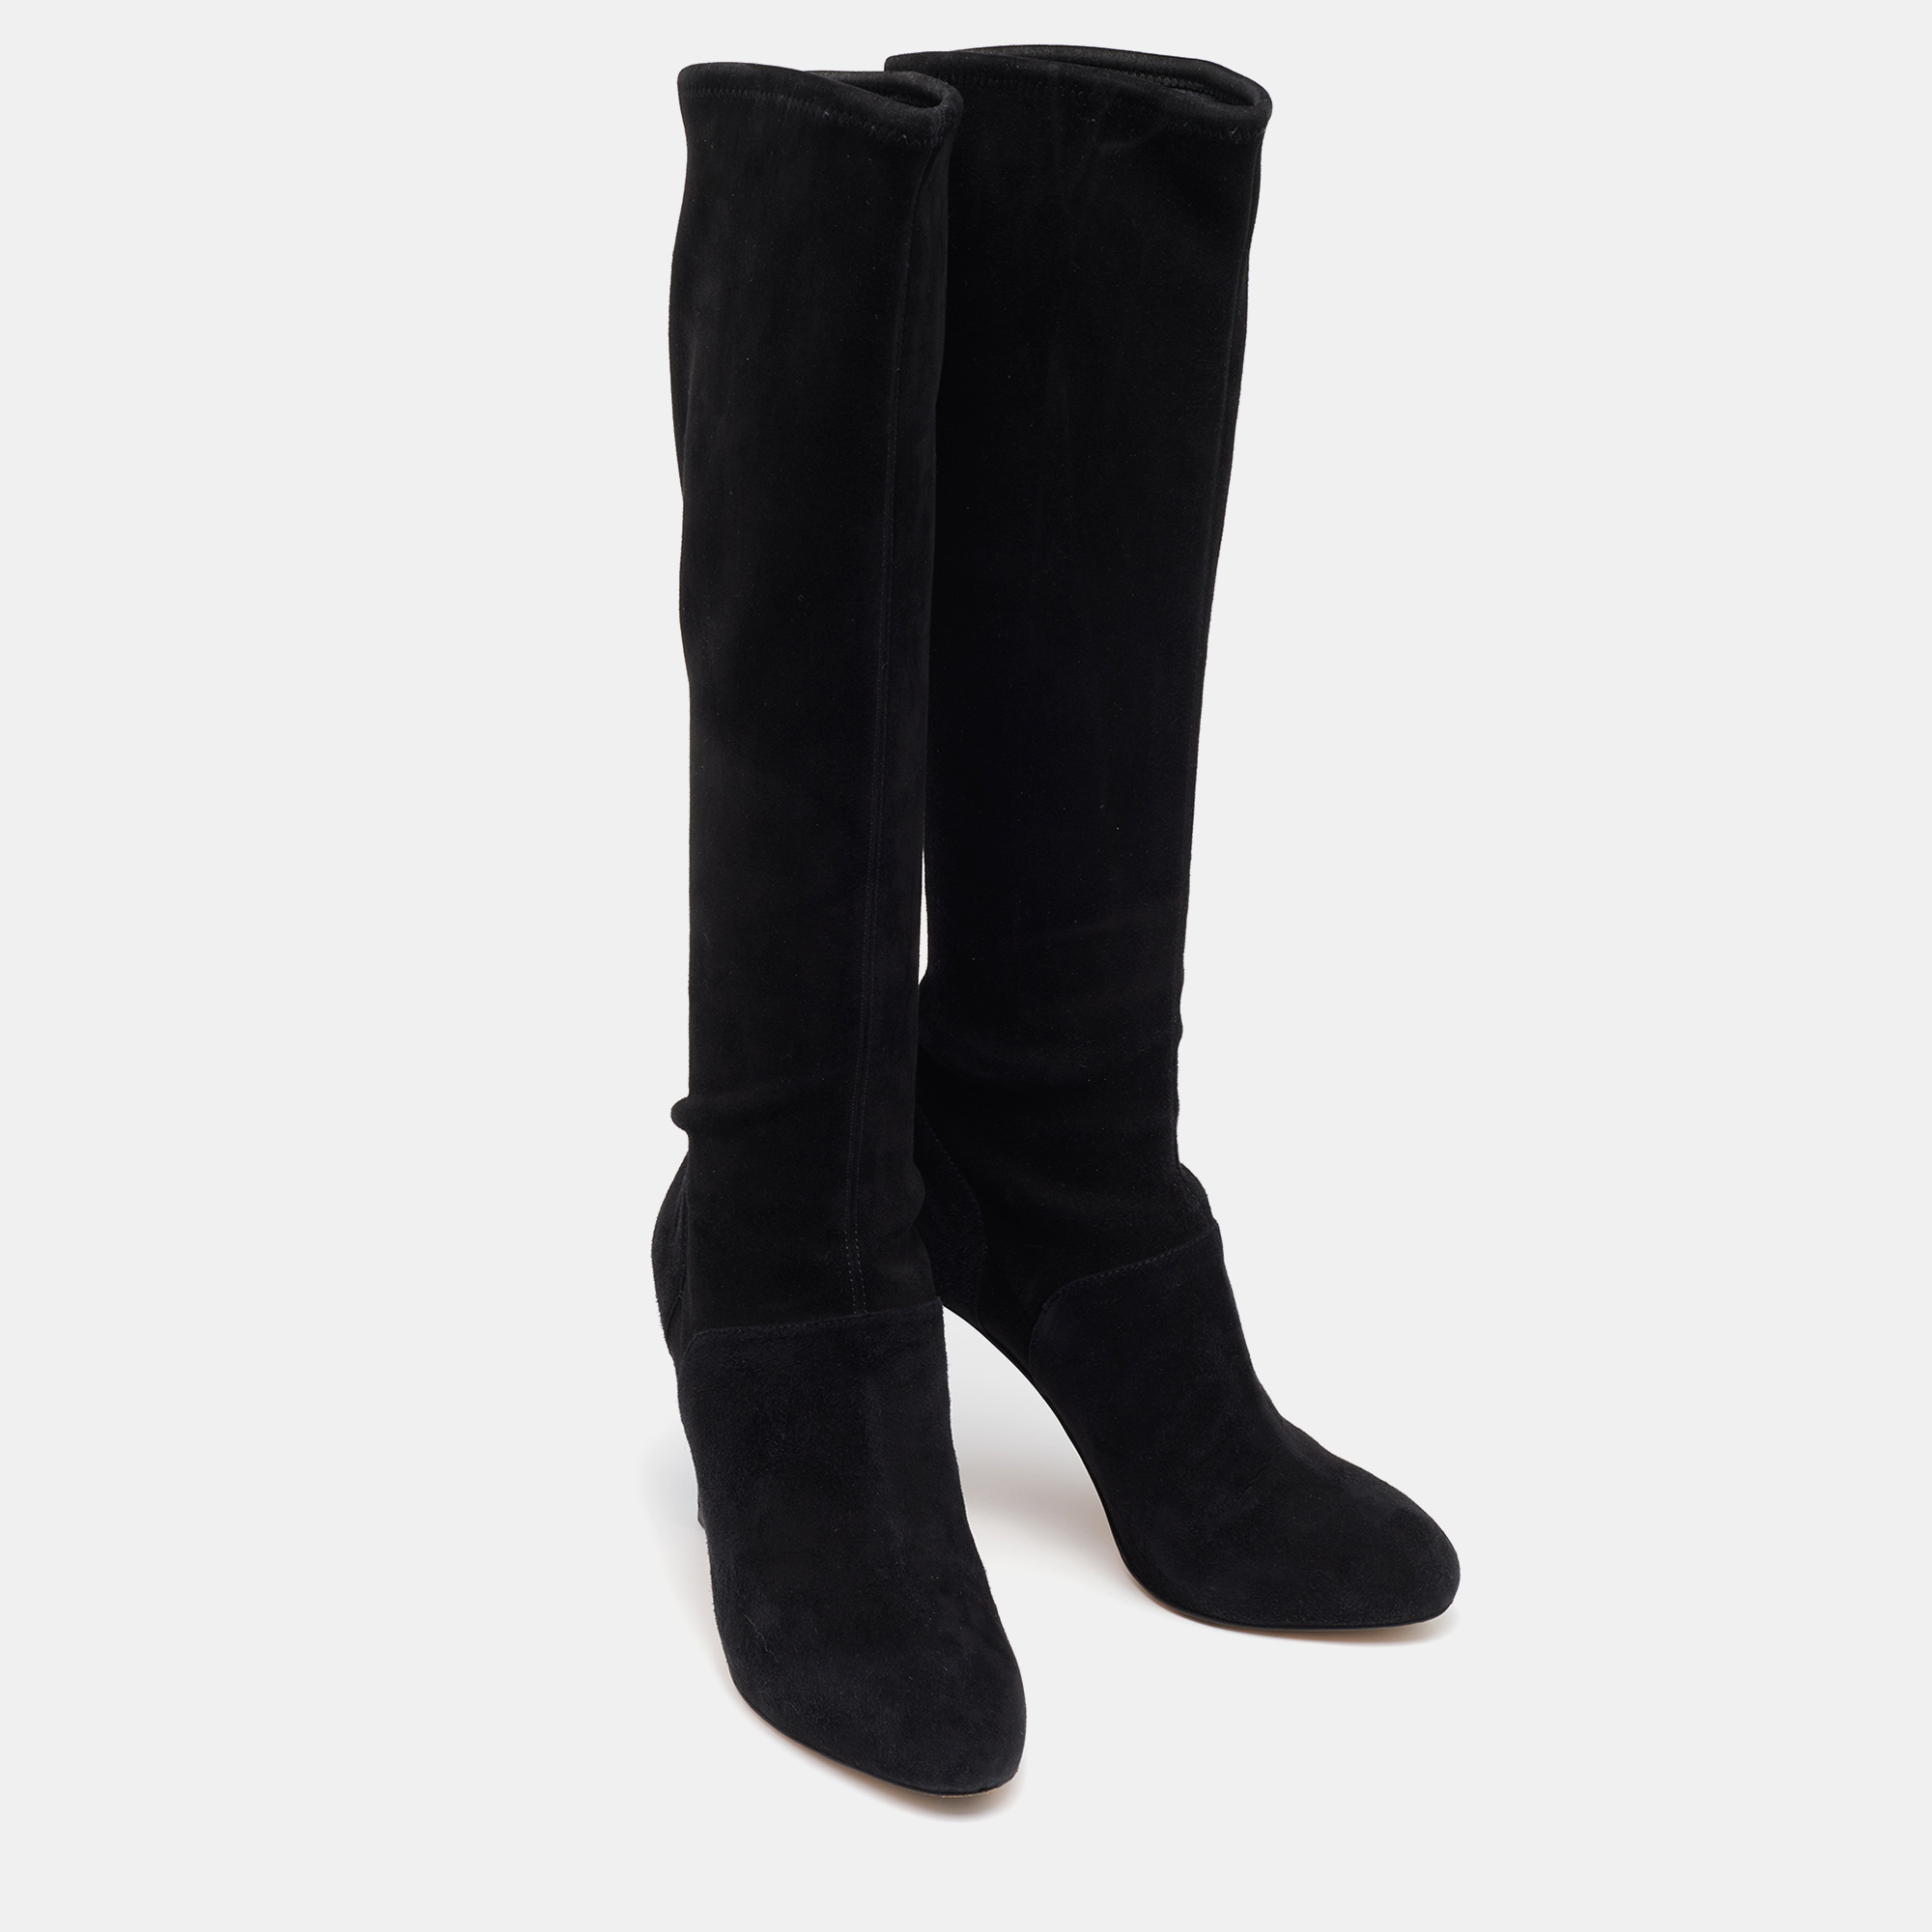 Gianvito Rossi Black Suede Knee Length Boots Size 37.5